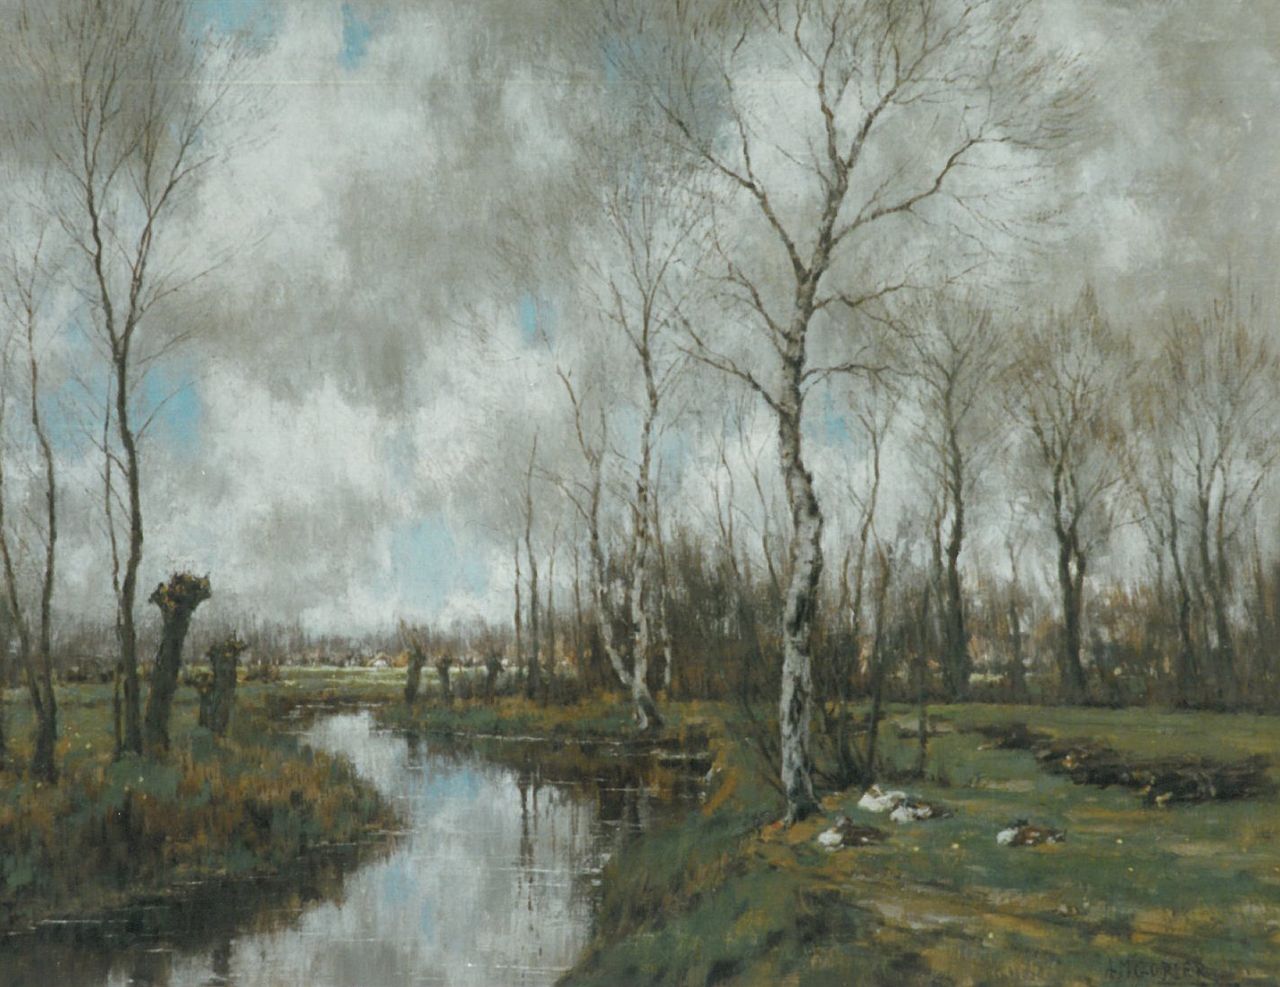 Gorter A.M.  | 'Arnold' Marc Gorter, Autumn landscape, the Vordense beek, oil on canvas 62.0 x 79.0 cm, signed l.r. and dated 1925